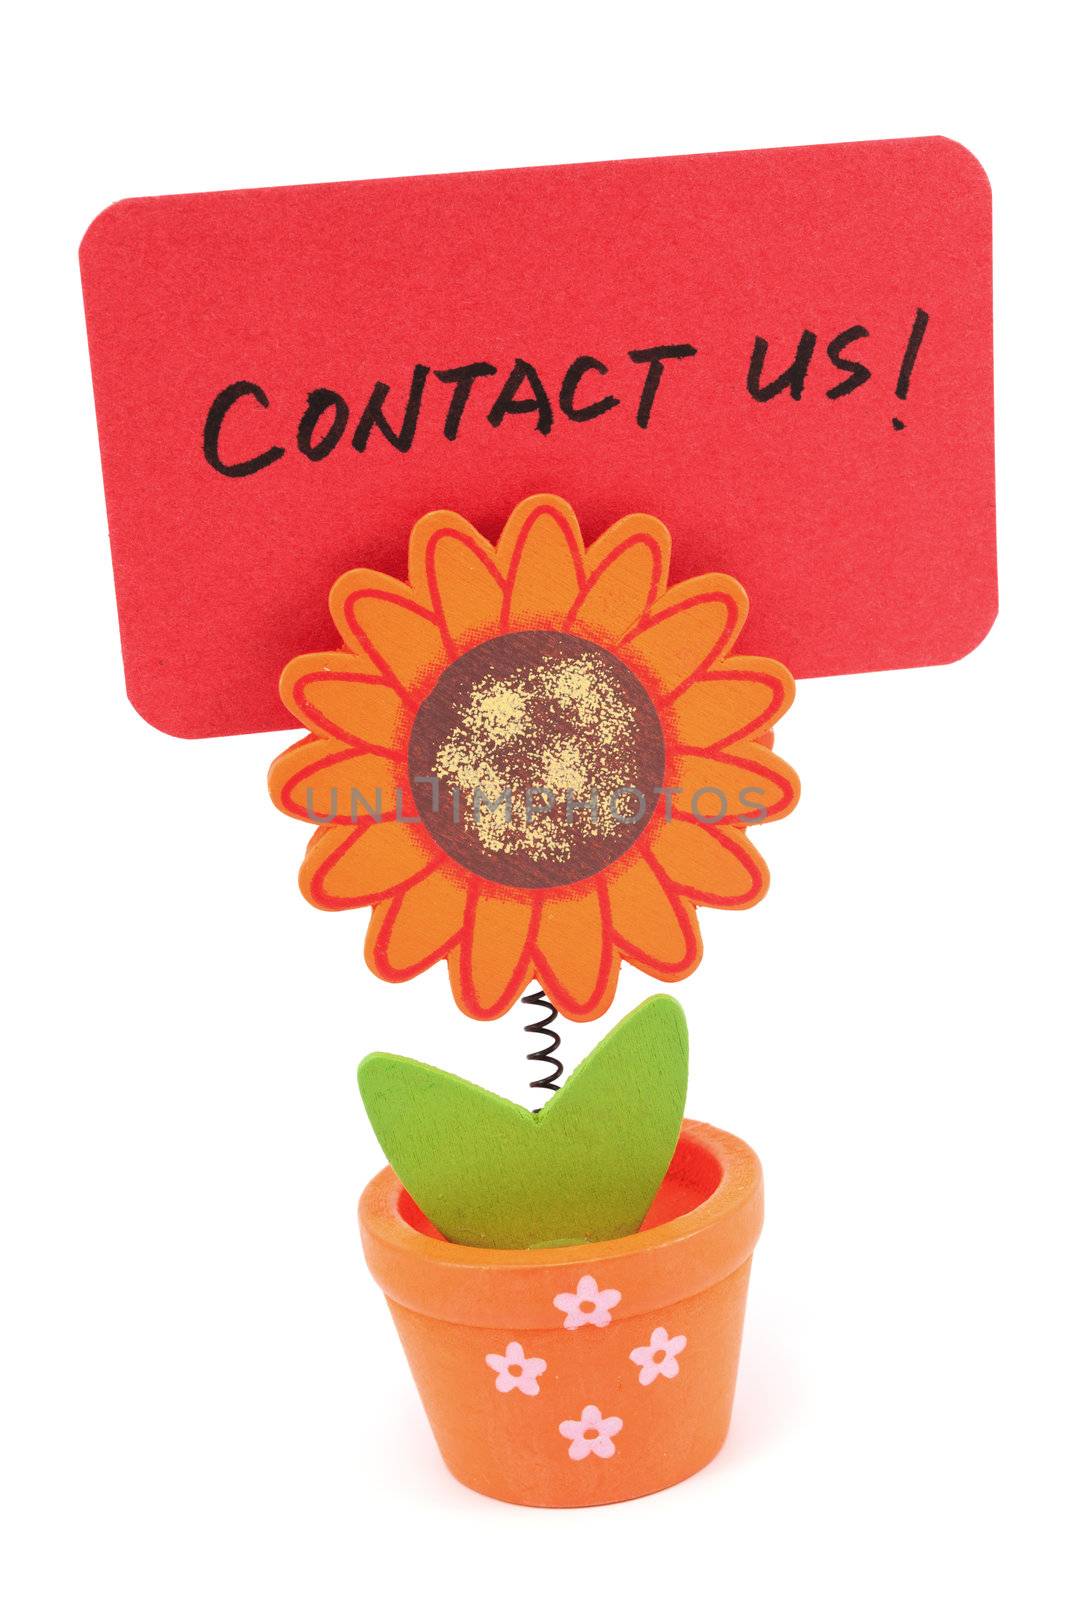 Contact us words written on red paper of sun flower pot clip